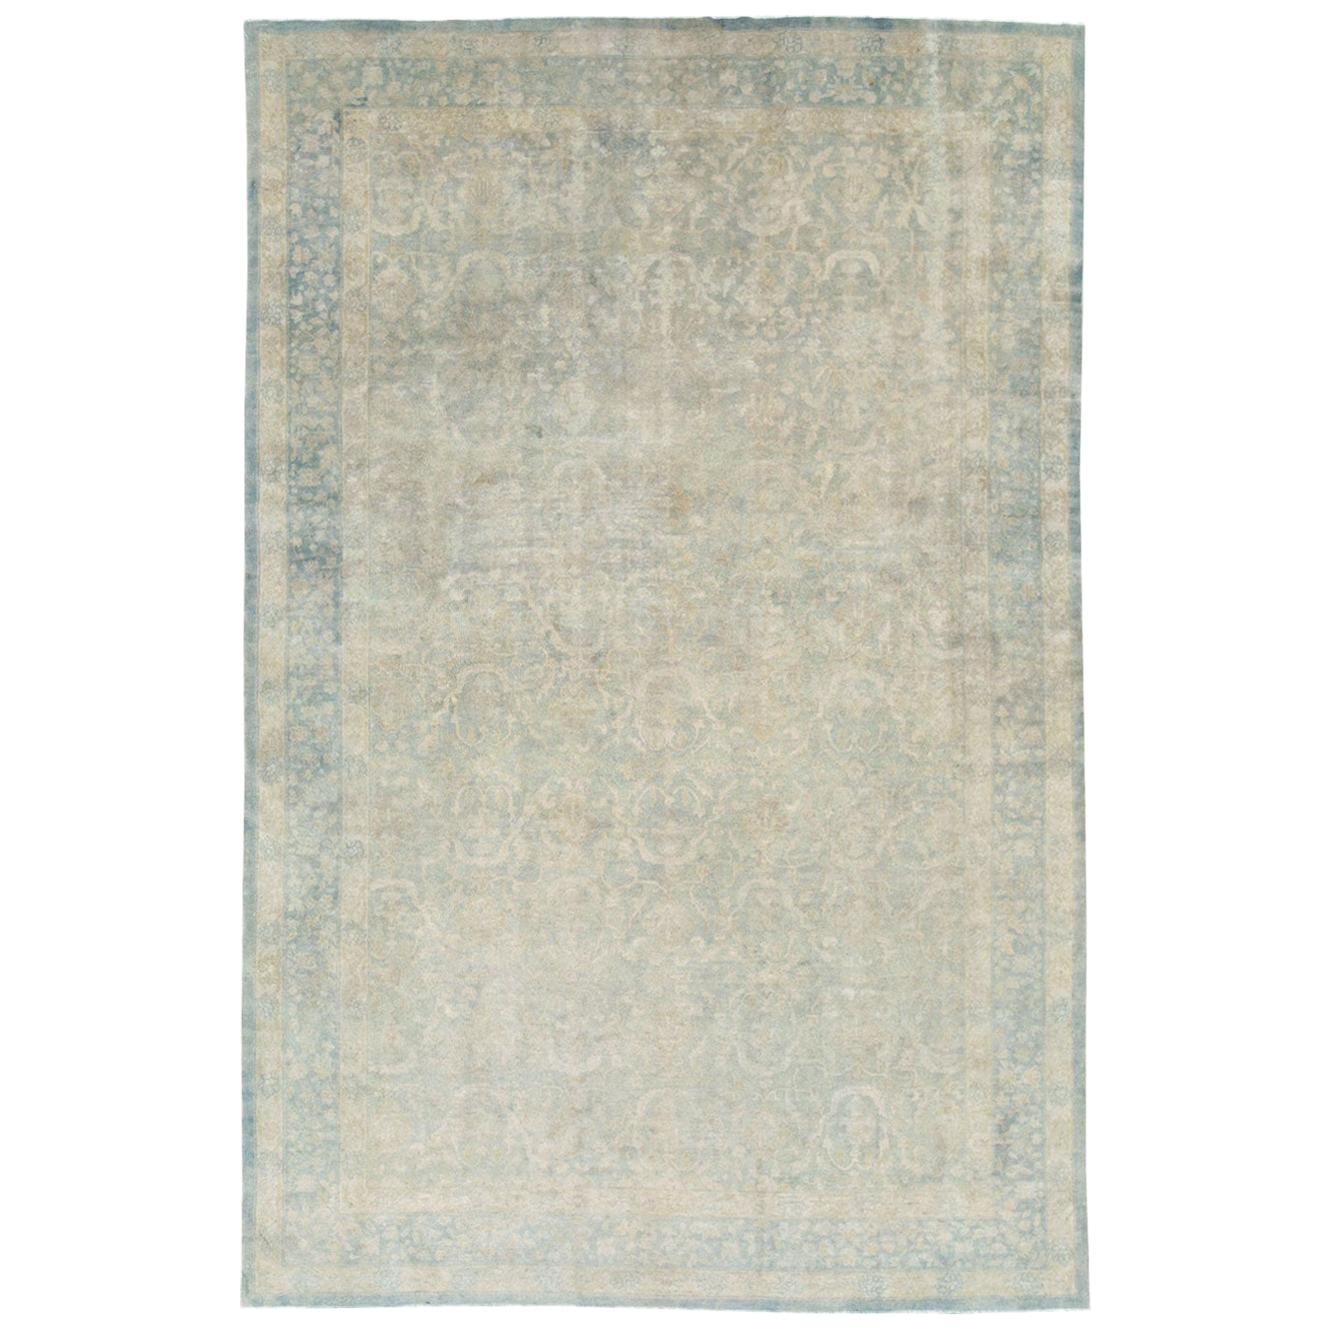 Large Handmade Chinese Carpet in Seafoam Blue and Seafoam Green For Sale